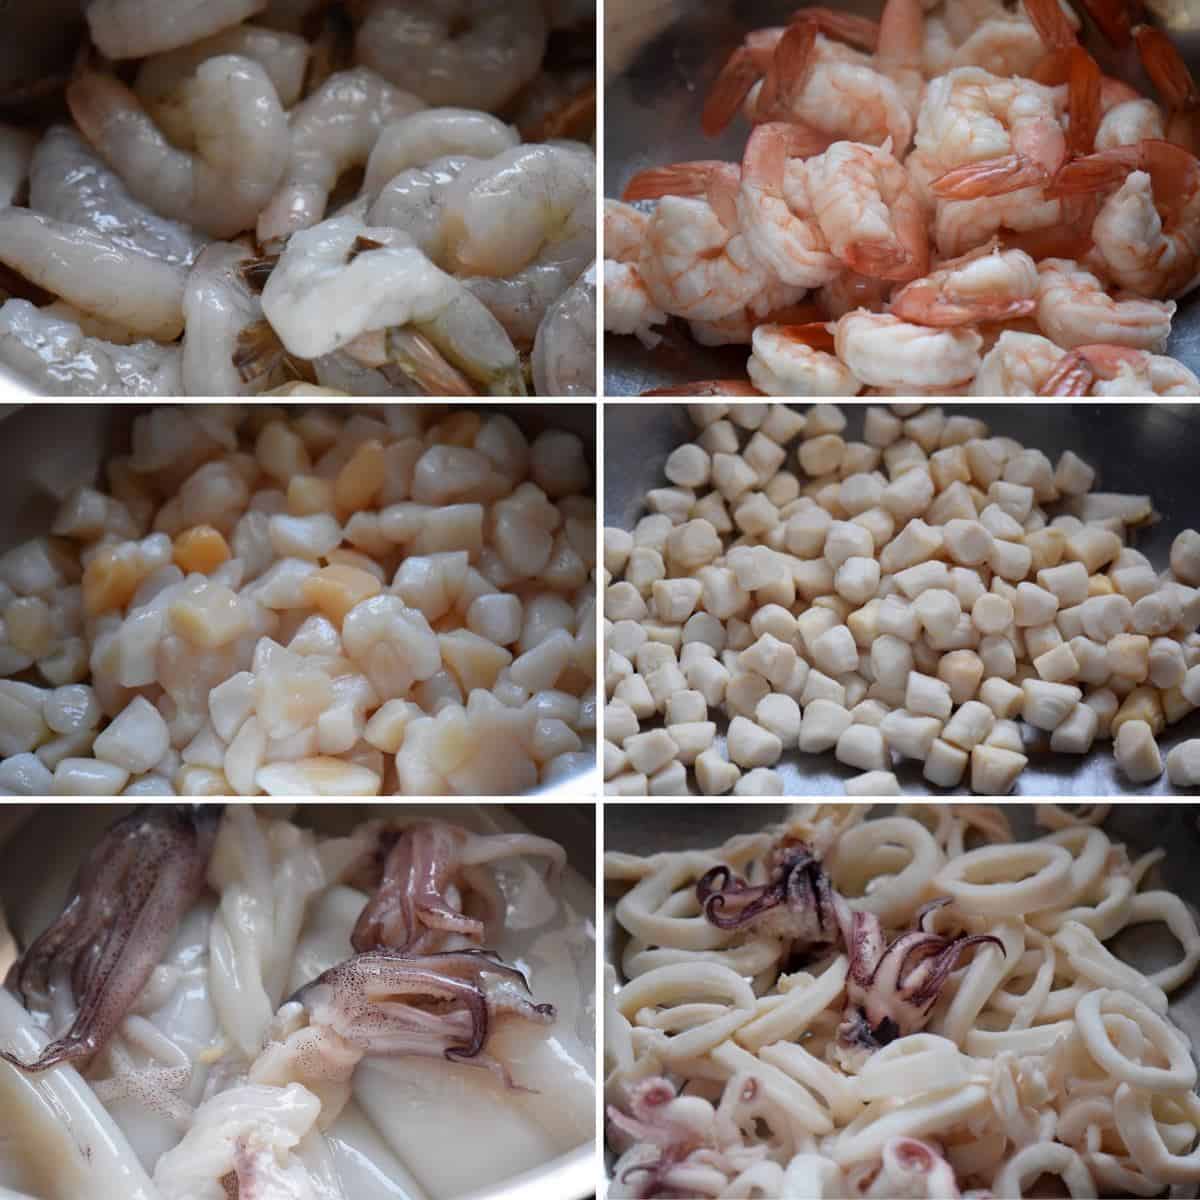 A collage of pictures showing shrimp, scallops and octopus before and after being cooked.